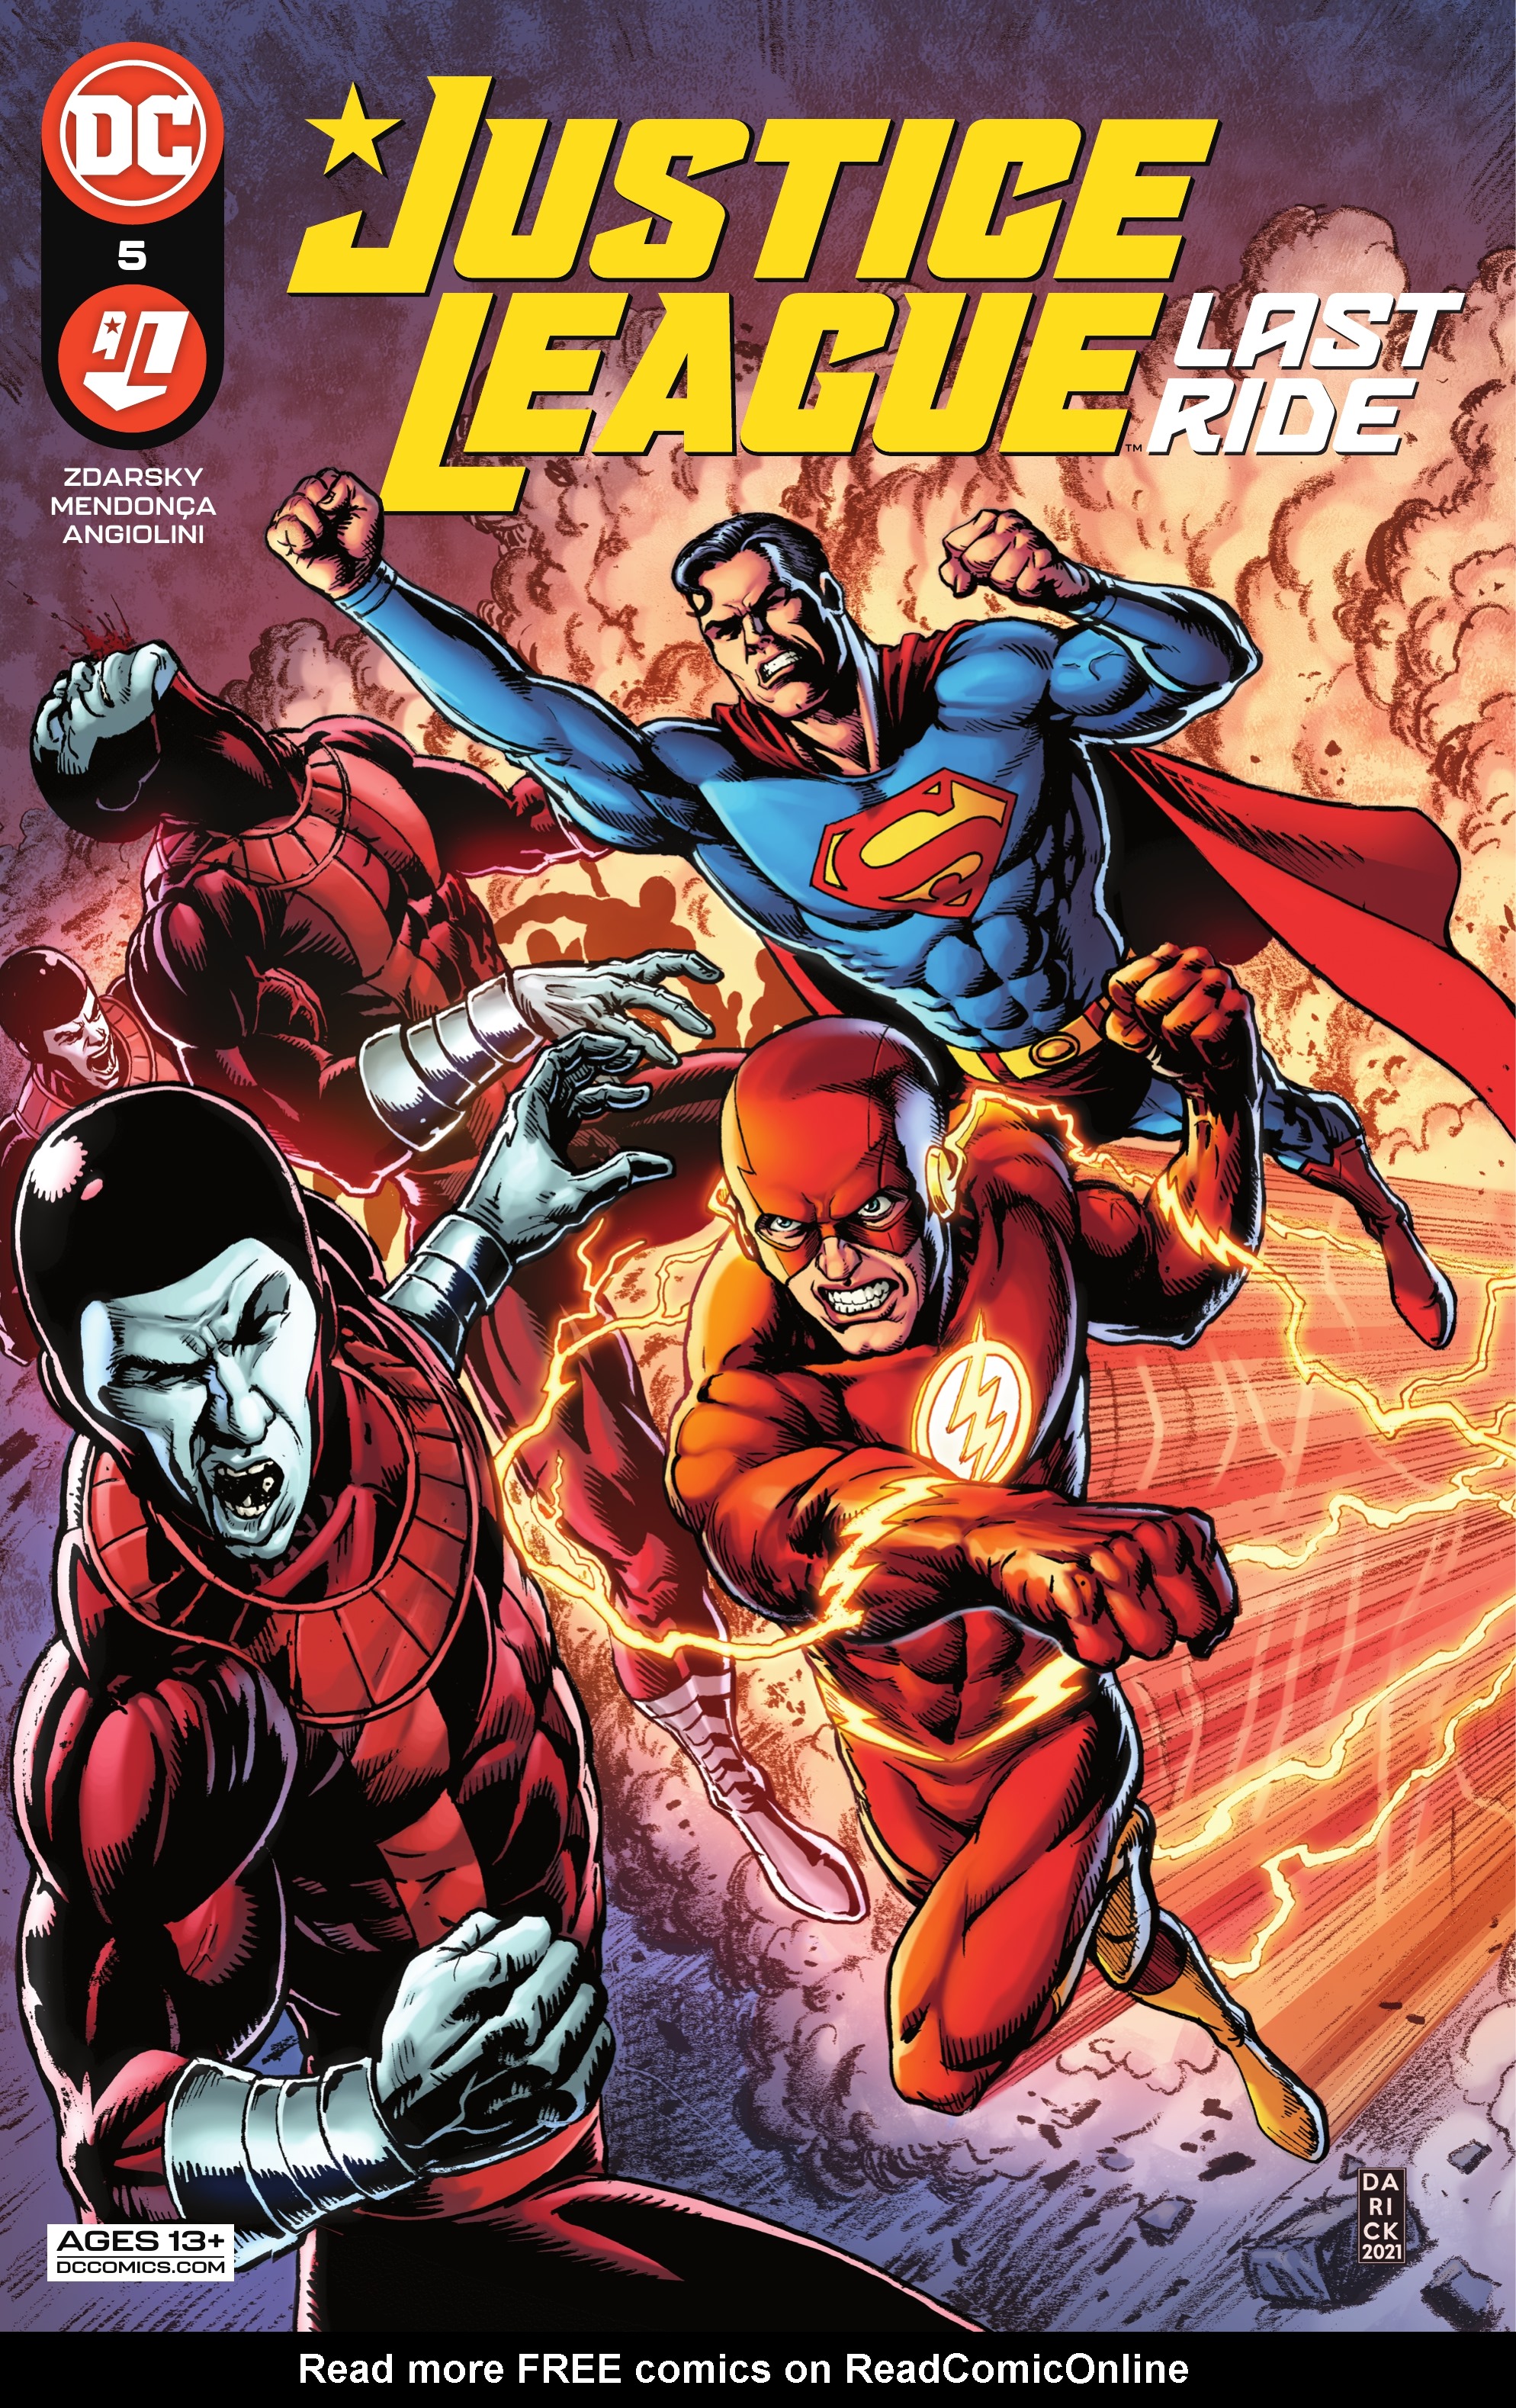 Read online Justice League: Last Ride comic -  Issue #5 - 1